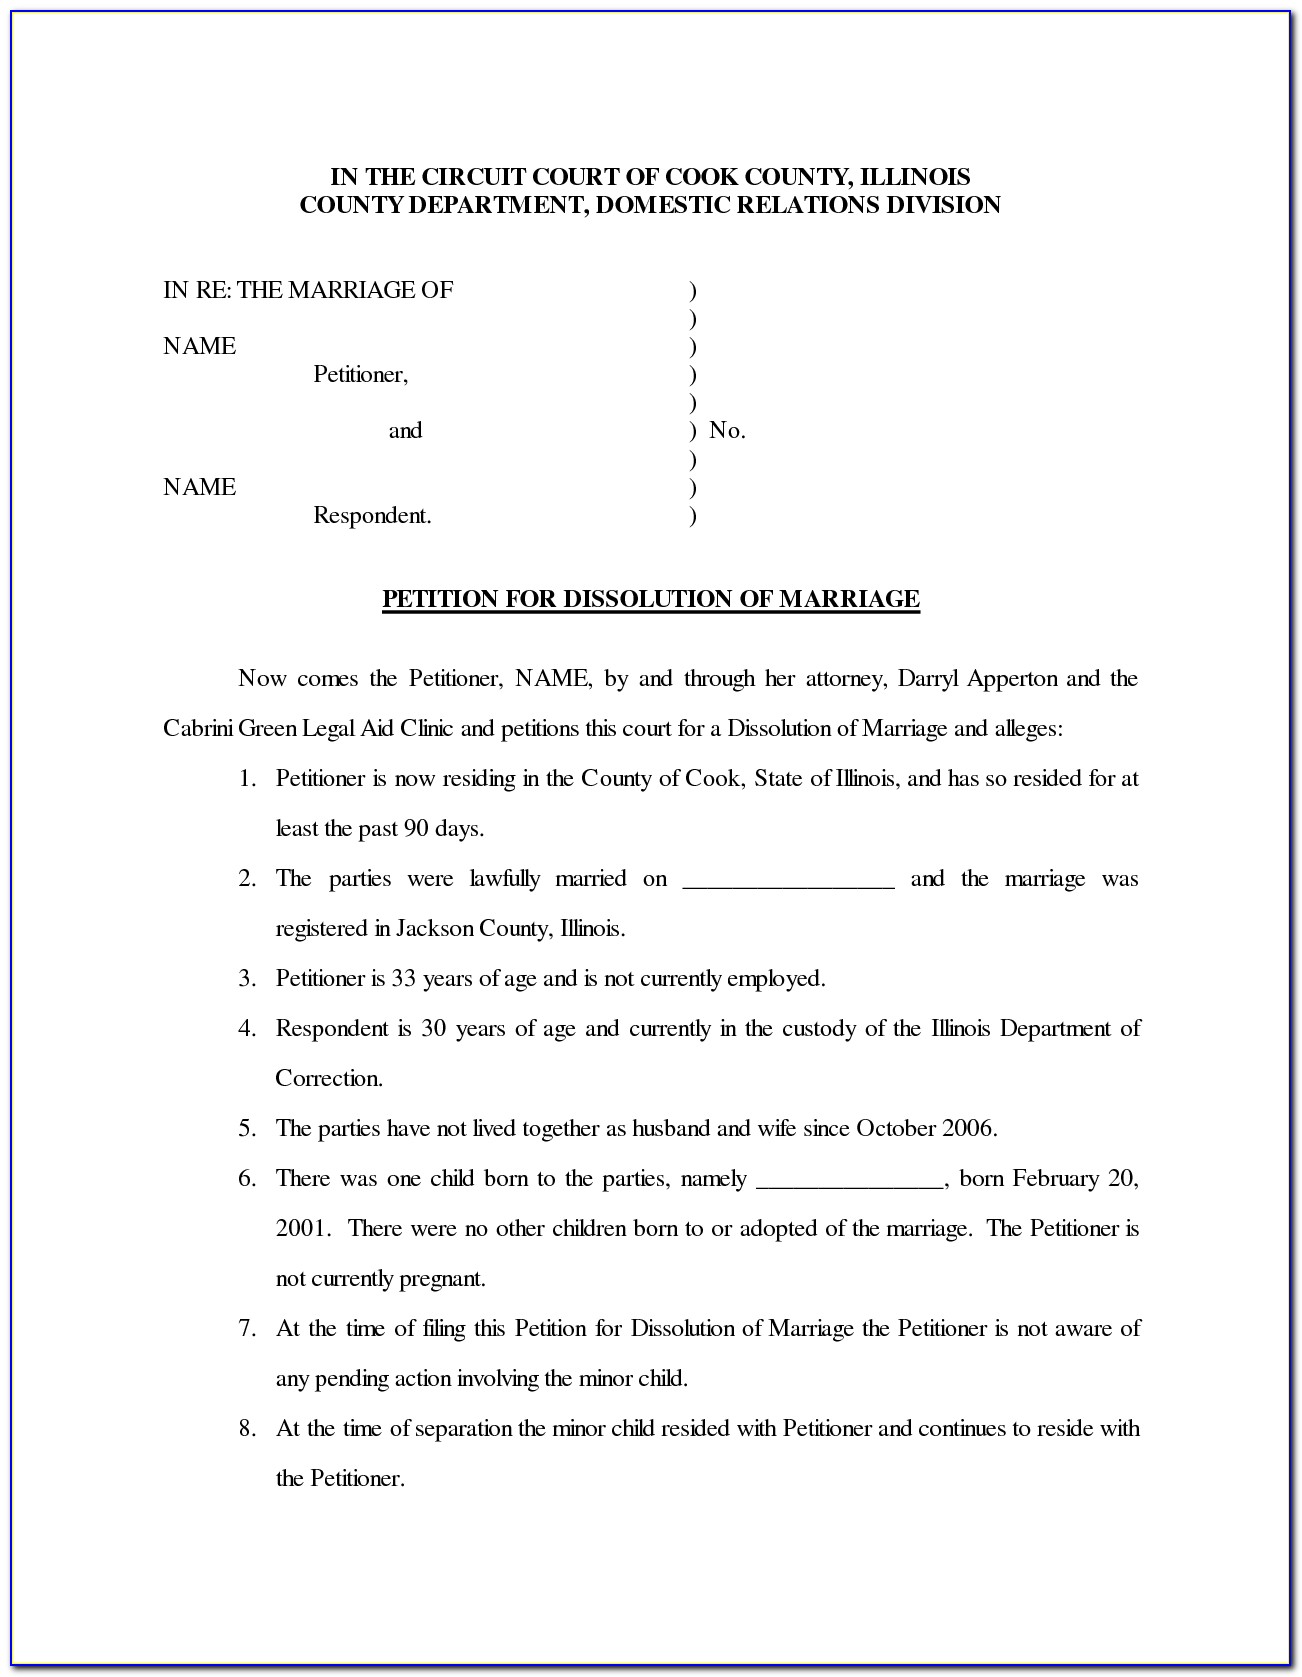 Texas Petition For Divorce Template